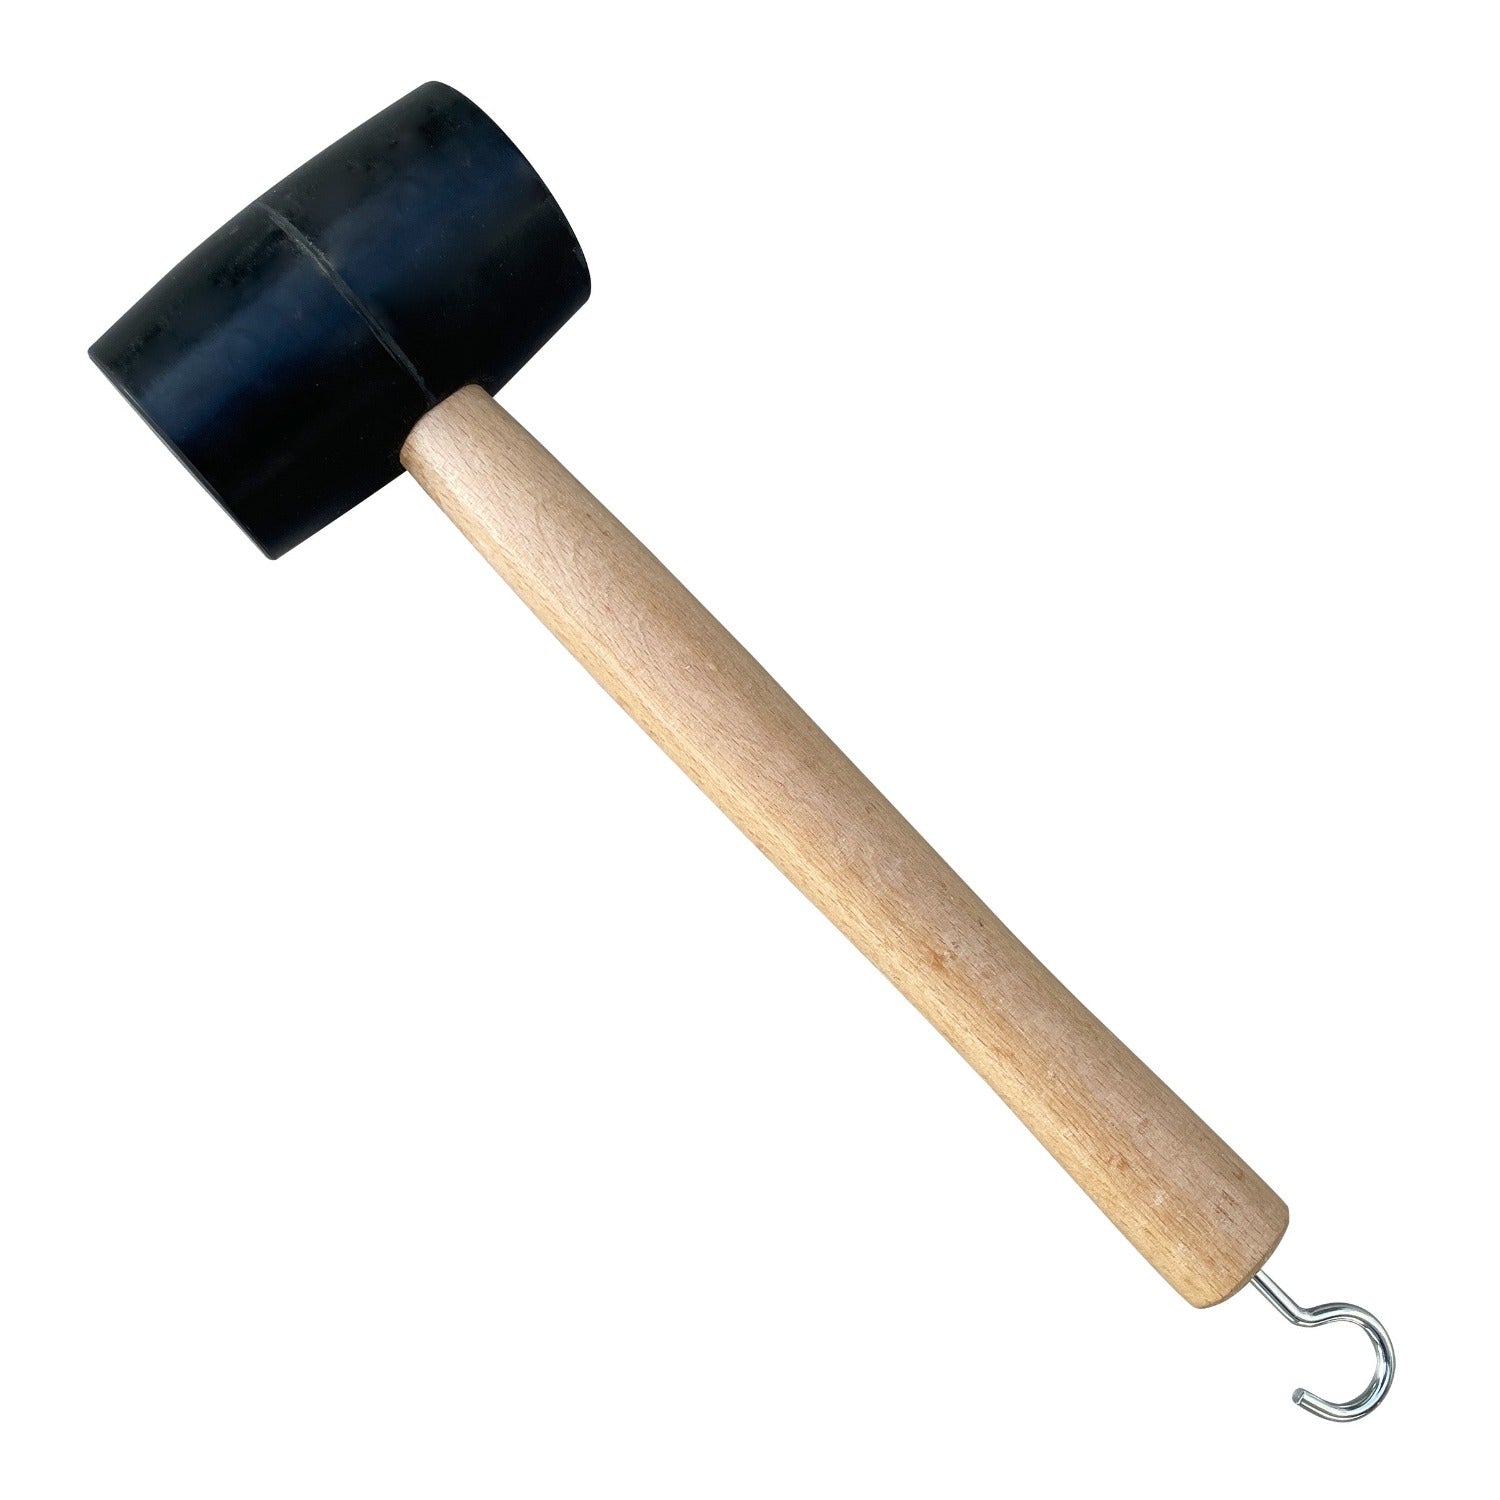 Small Rubber Mallet The Versatile Tool - Free Pictures Photos